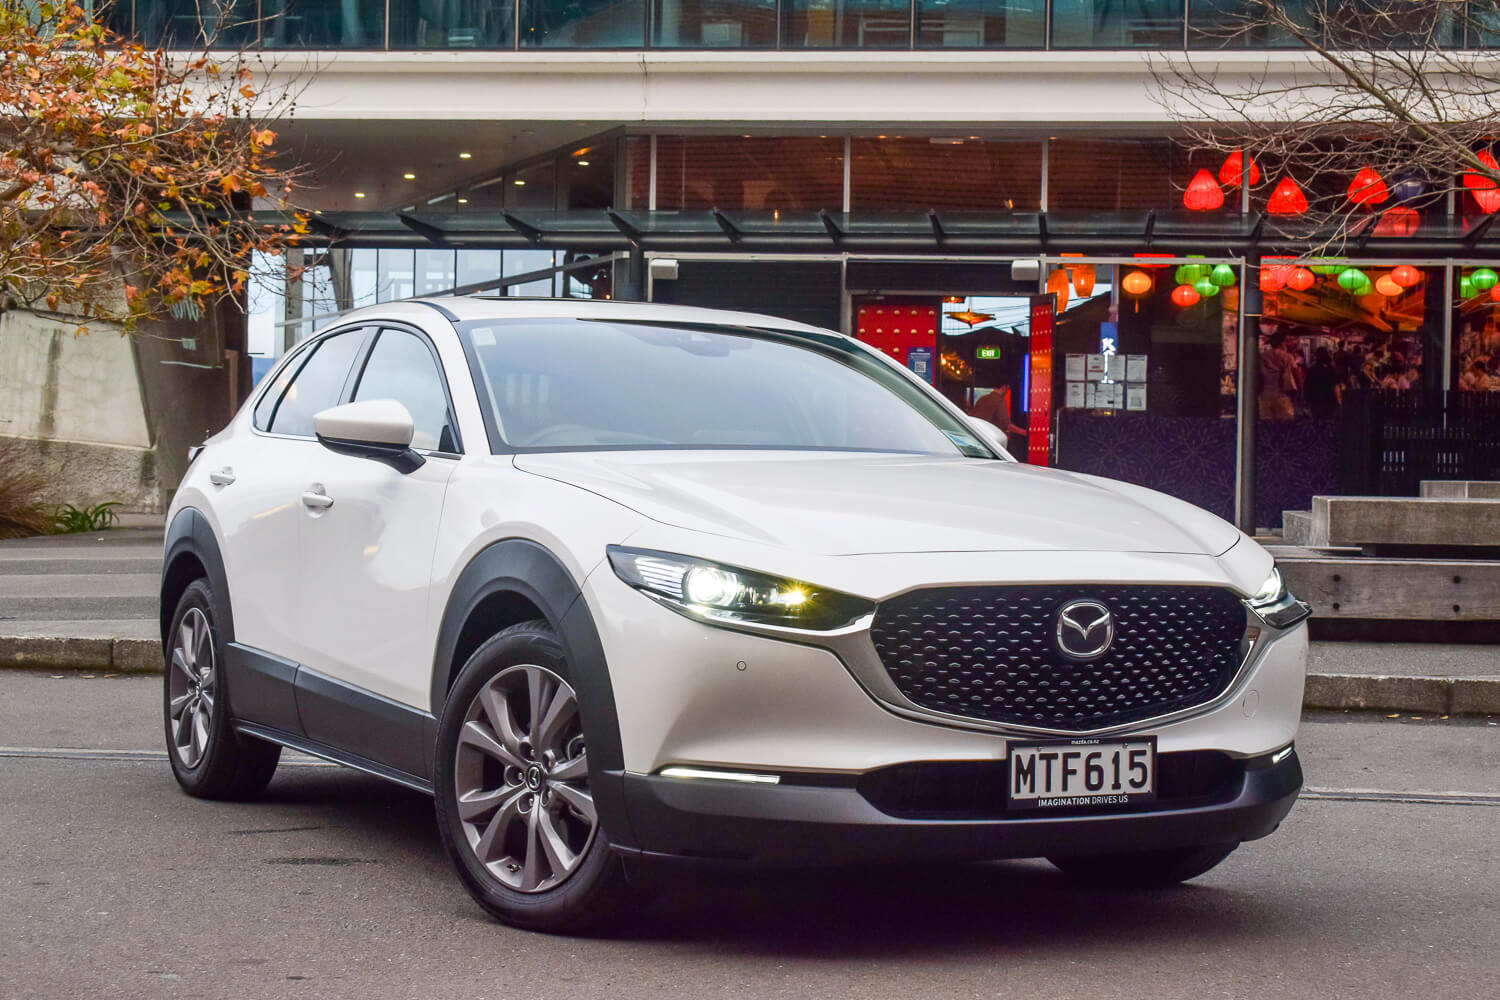 2021 Mazda CX-30 Long-Term Road Test: 40,000-Mile Wrap-Up